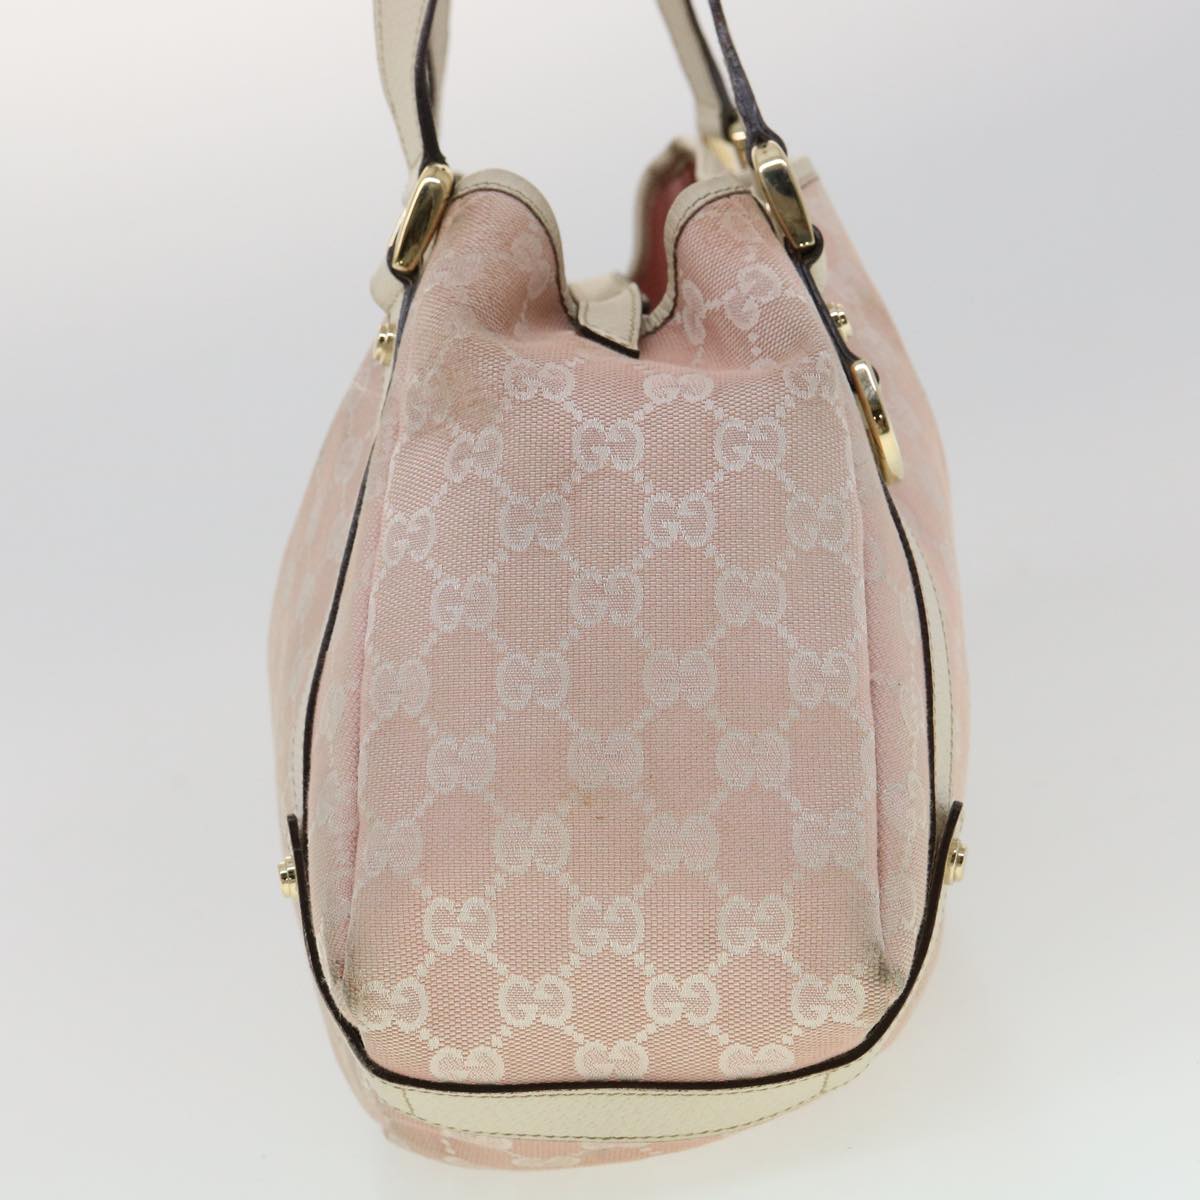 GUCCI GG Canvas Tote Bag Pink 1307363444 Auth am3171